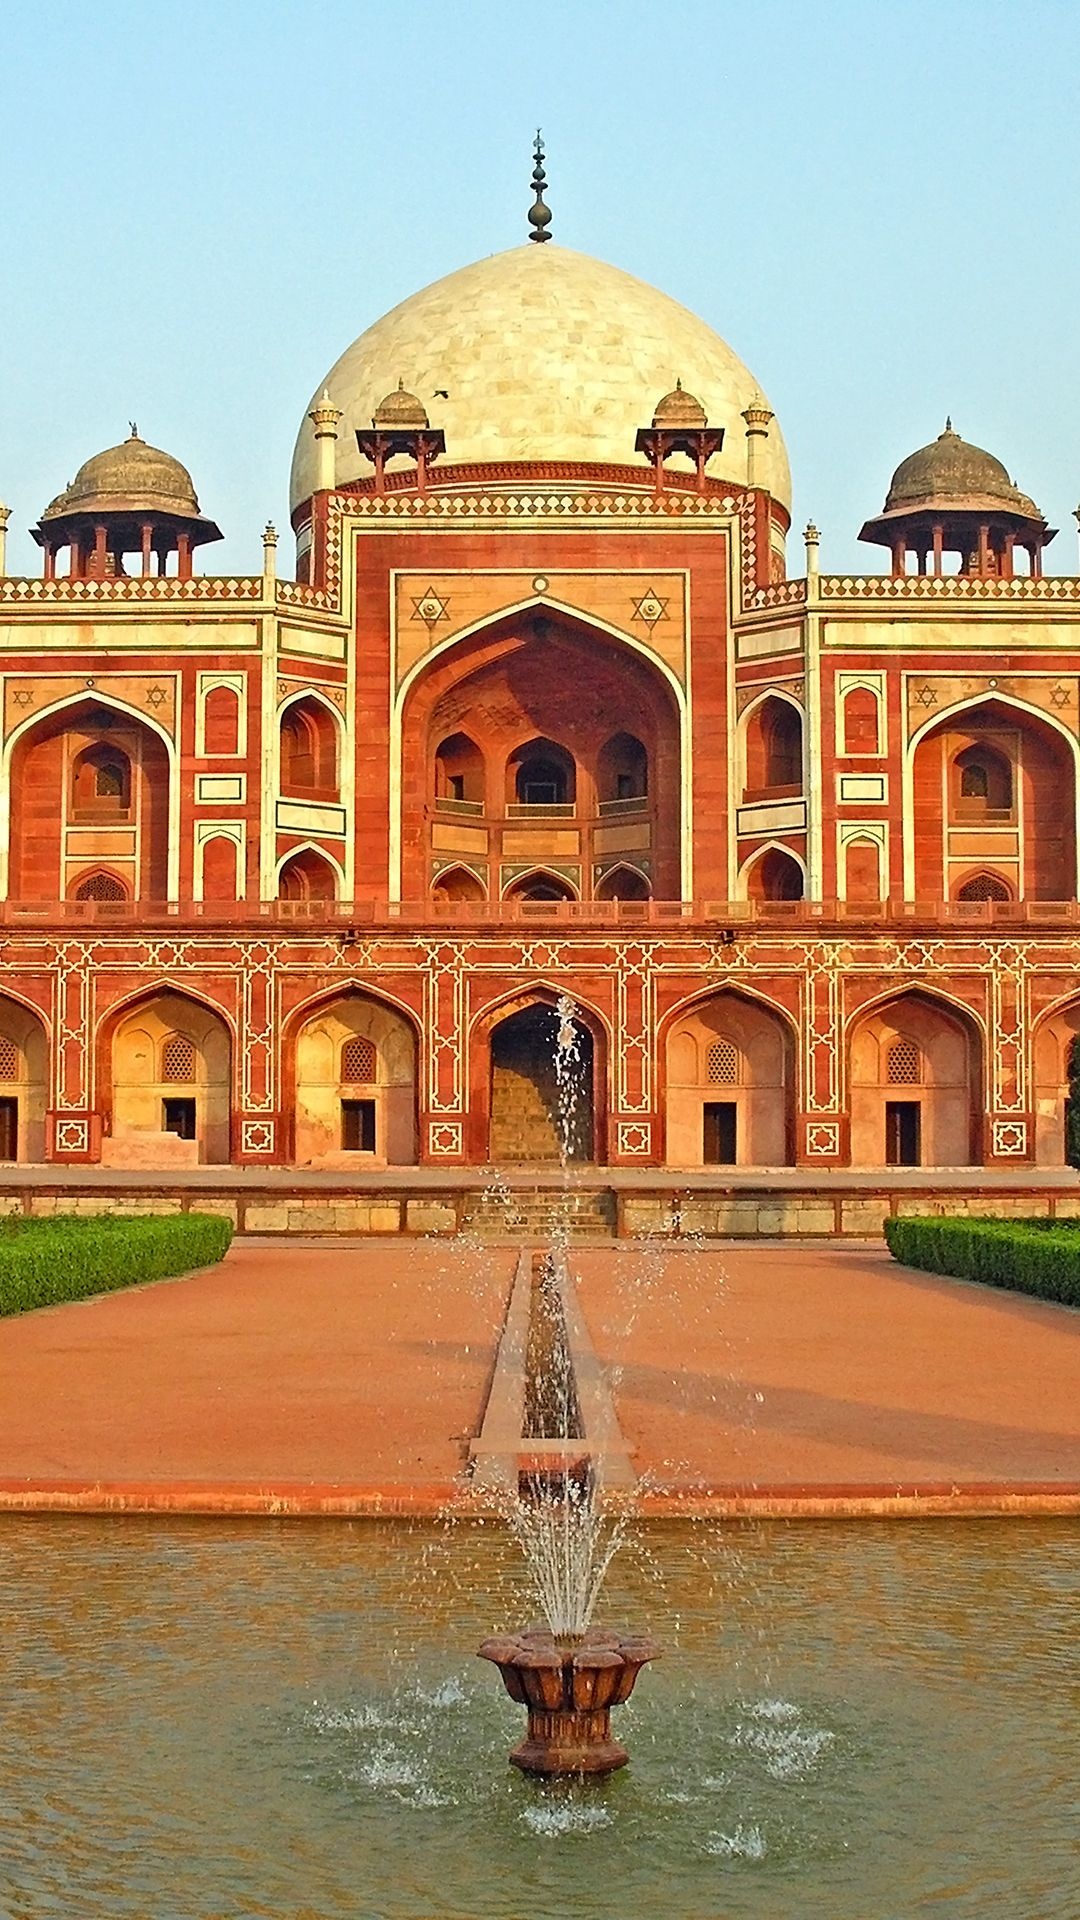 New Delhi, India iphone wallpapers, India iphone backgrounds, 1080x1920 Full HD Phone